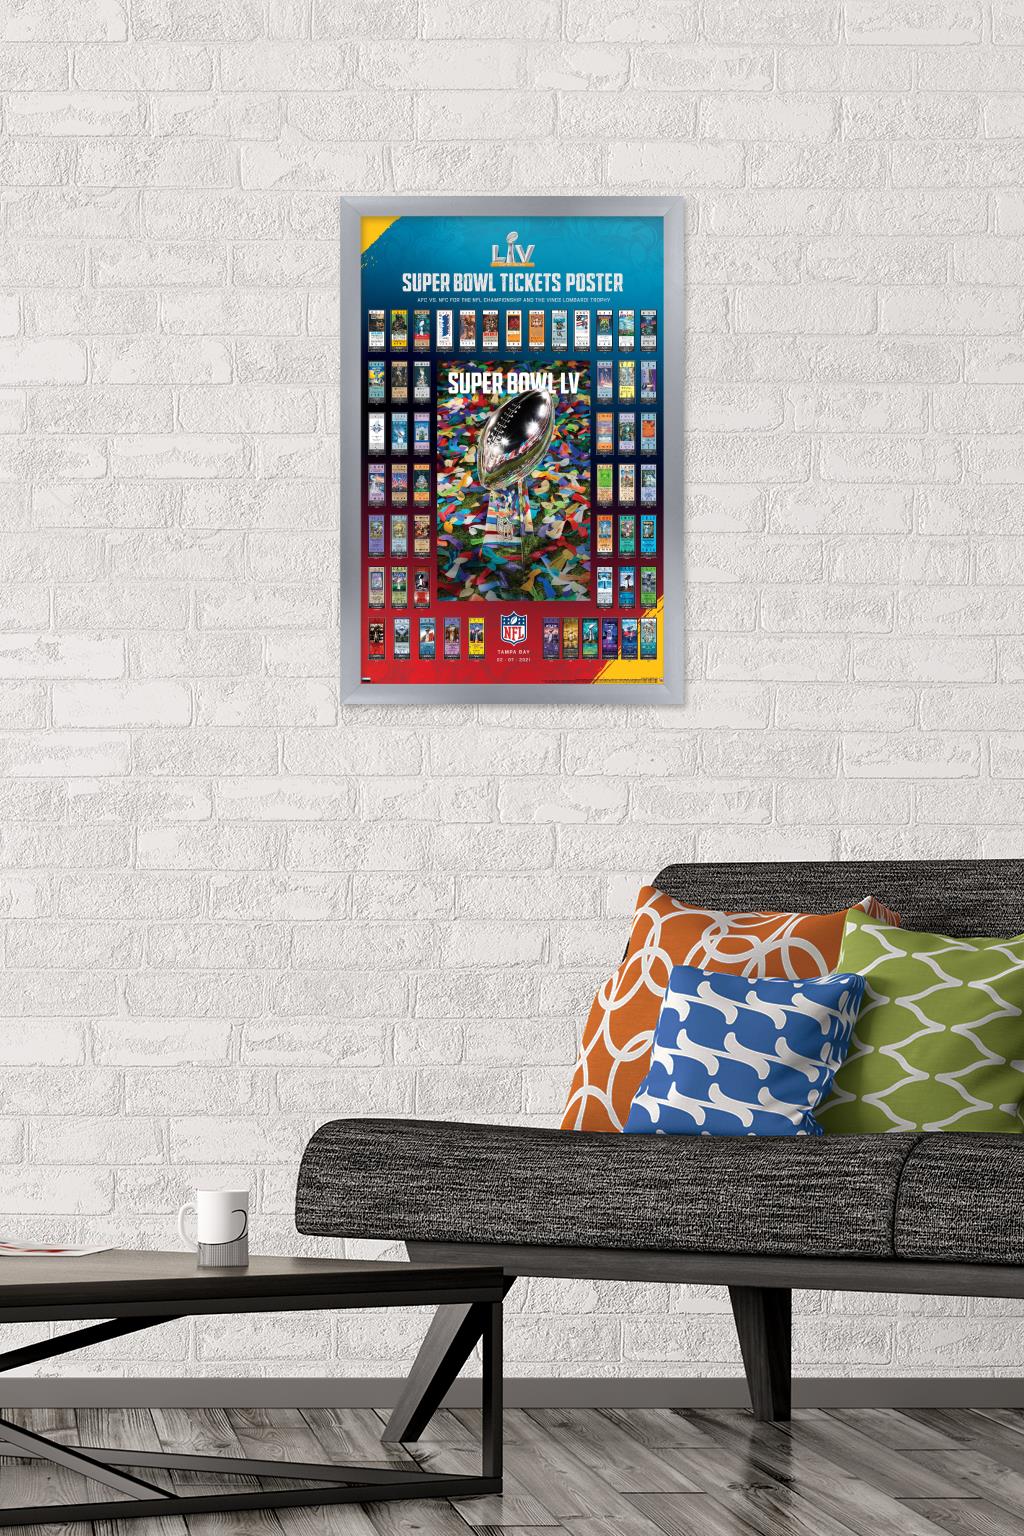 Trends International NFL League - Super Bowl LV - Tickets Wall Poster 16.5" x 24.25" x .75" Silver Framed Version - image 2 of 5